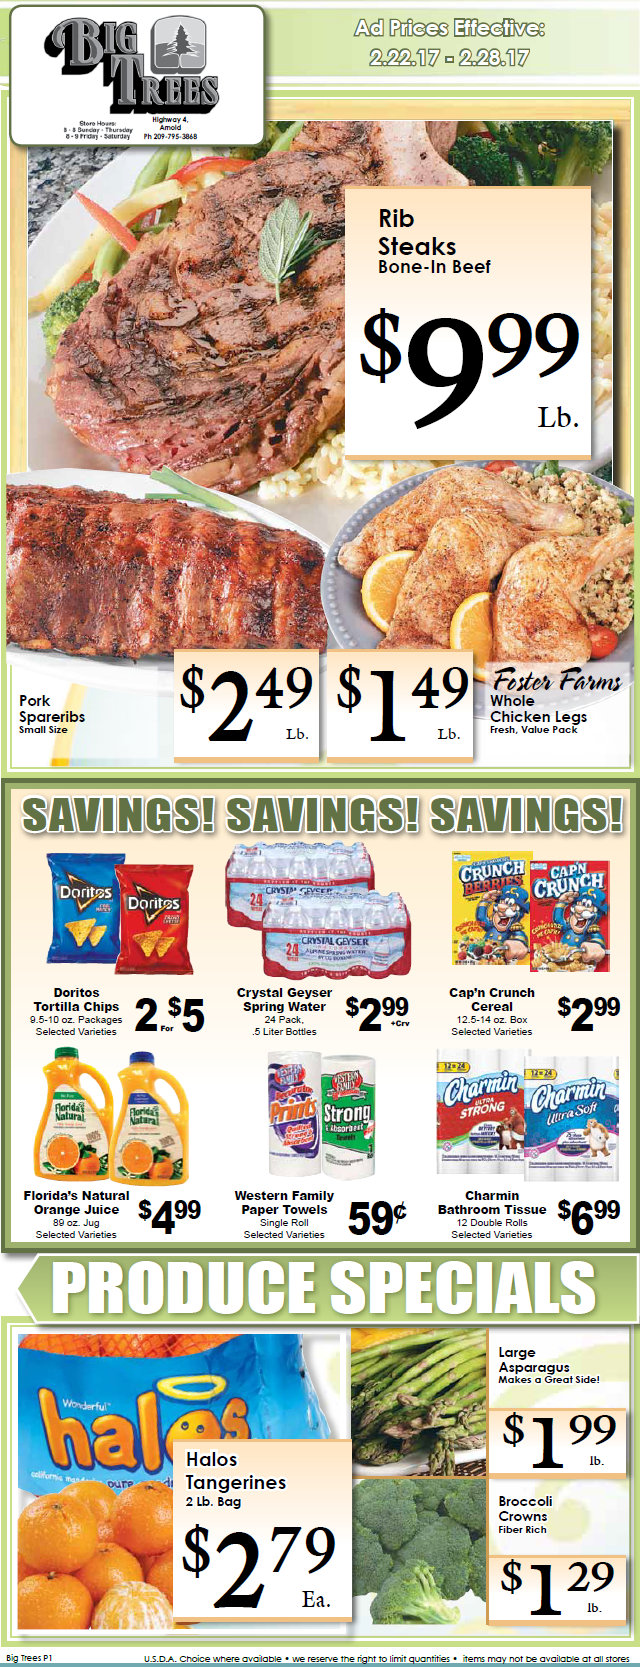 Big Trees Market Weekly Ad & Grocery Specials Through February 28th